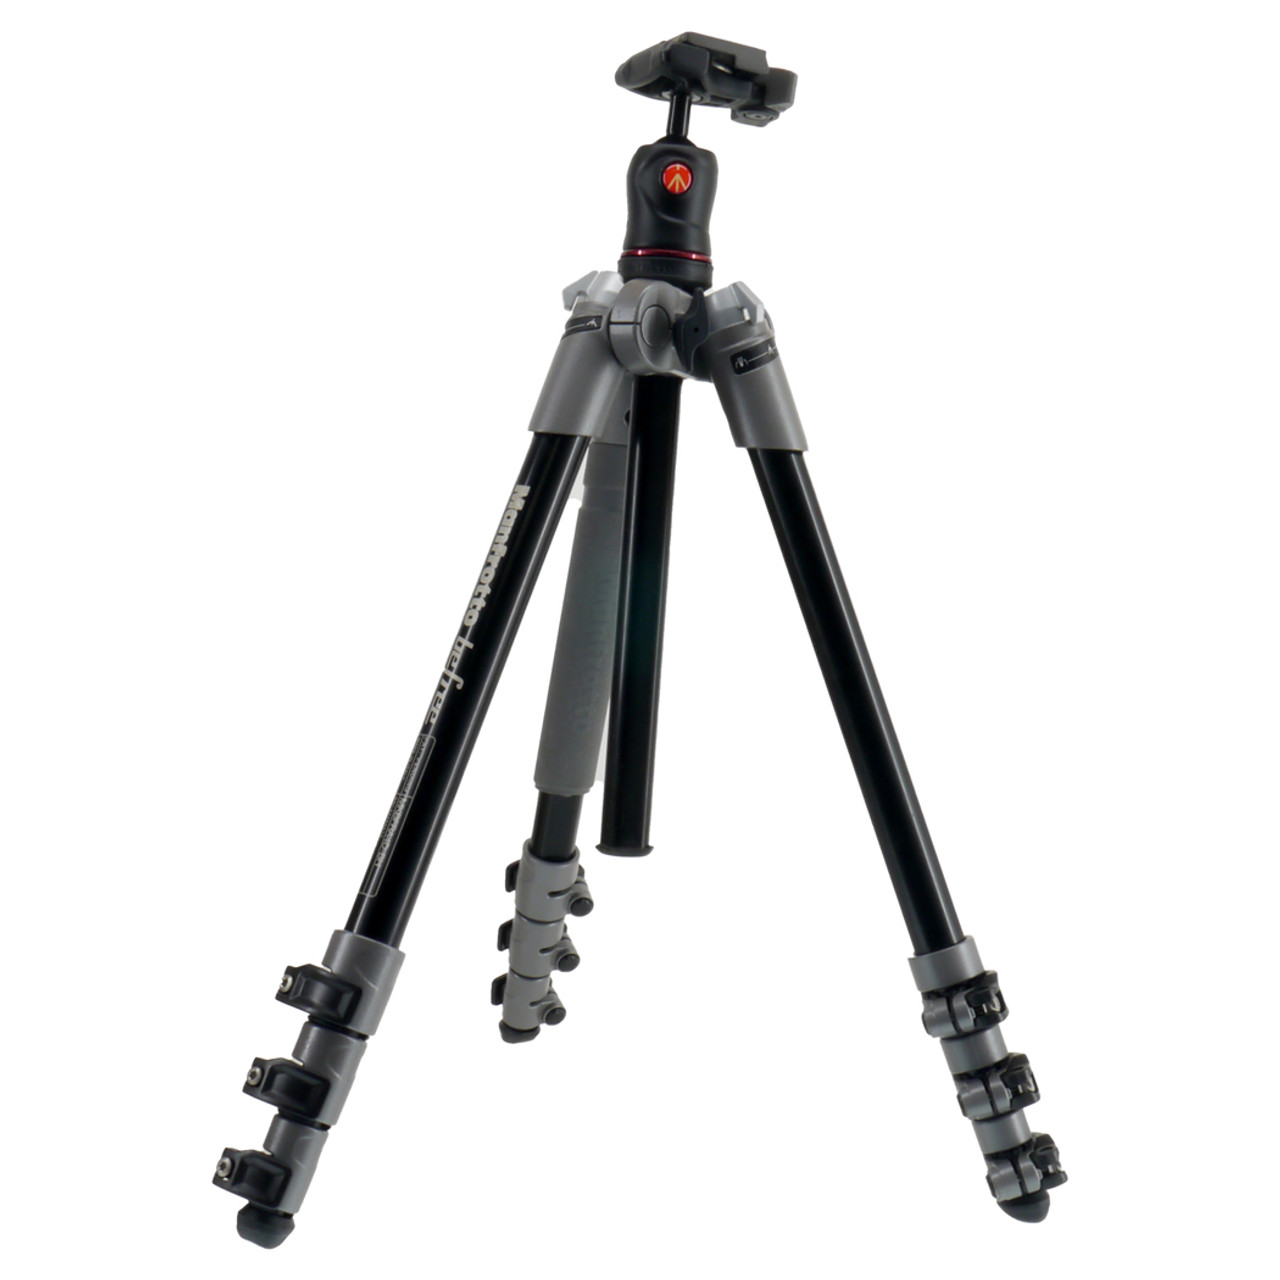 USED MANFROTTO BEFREE TRIPOD